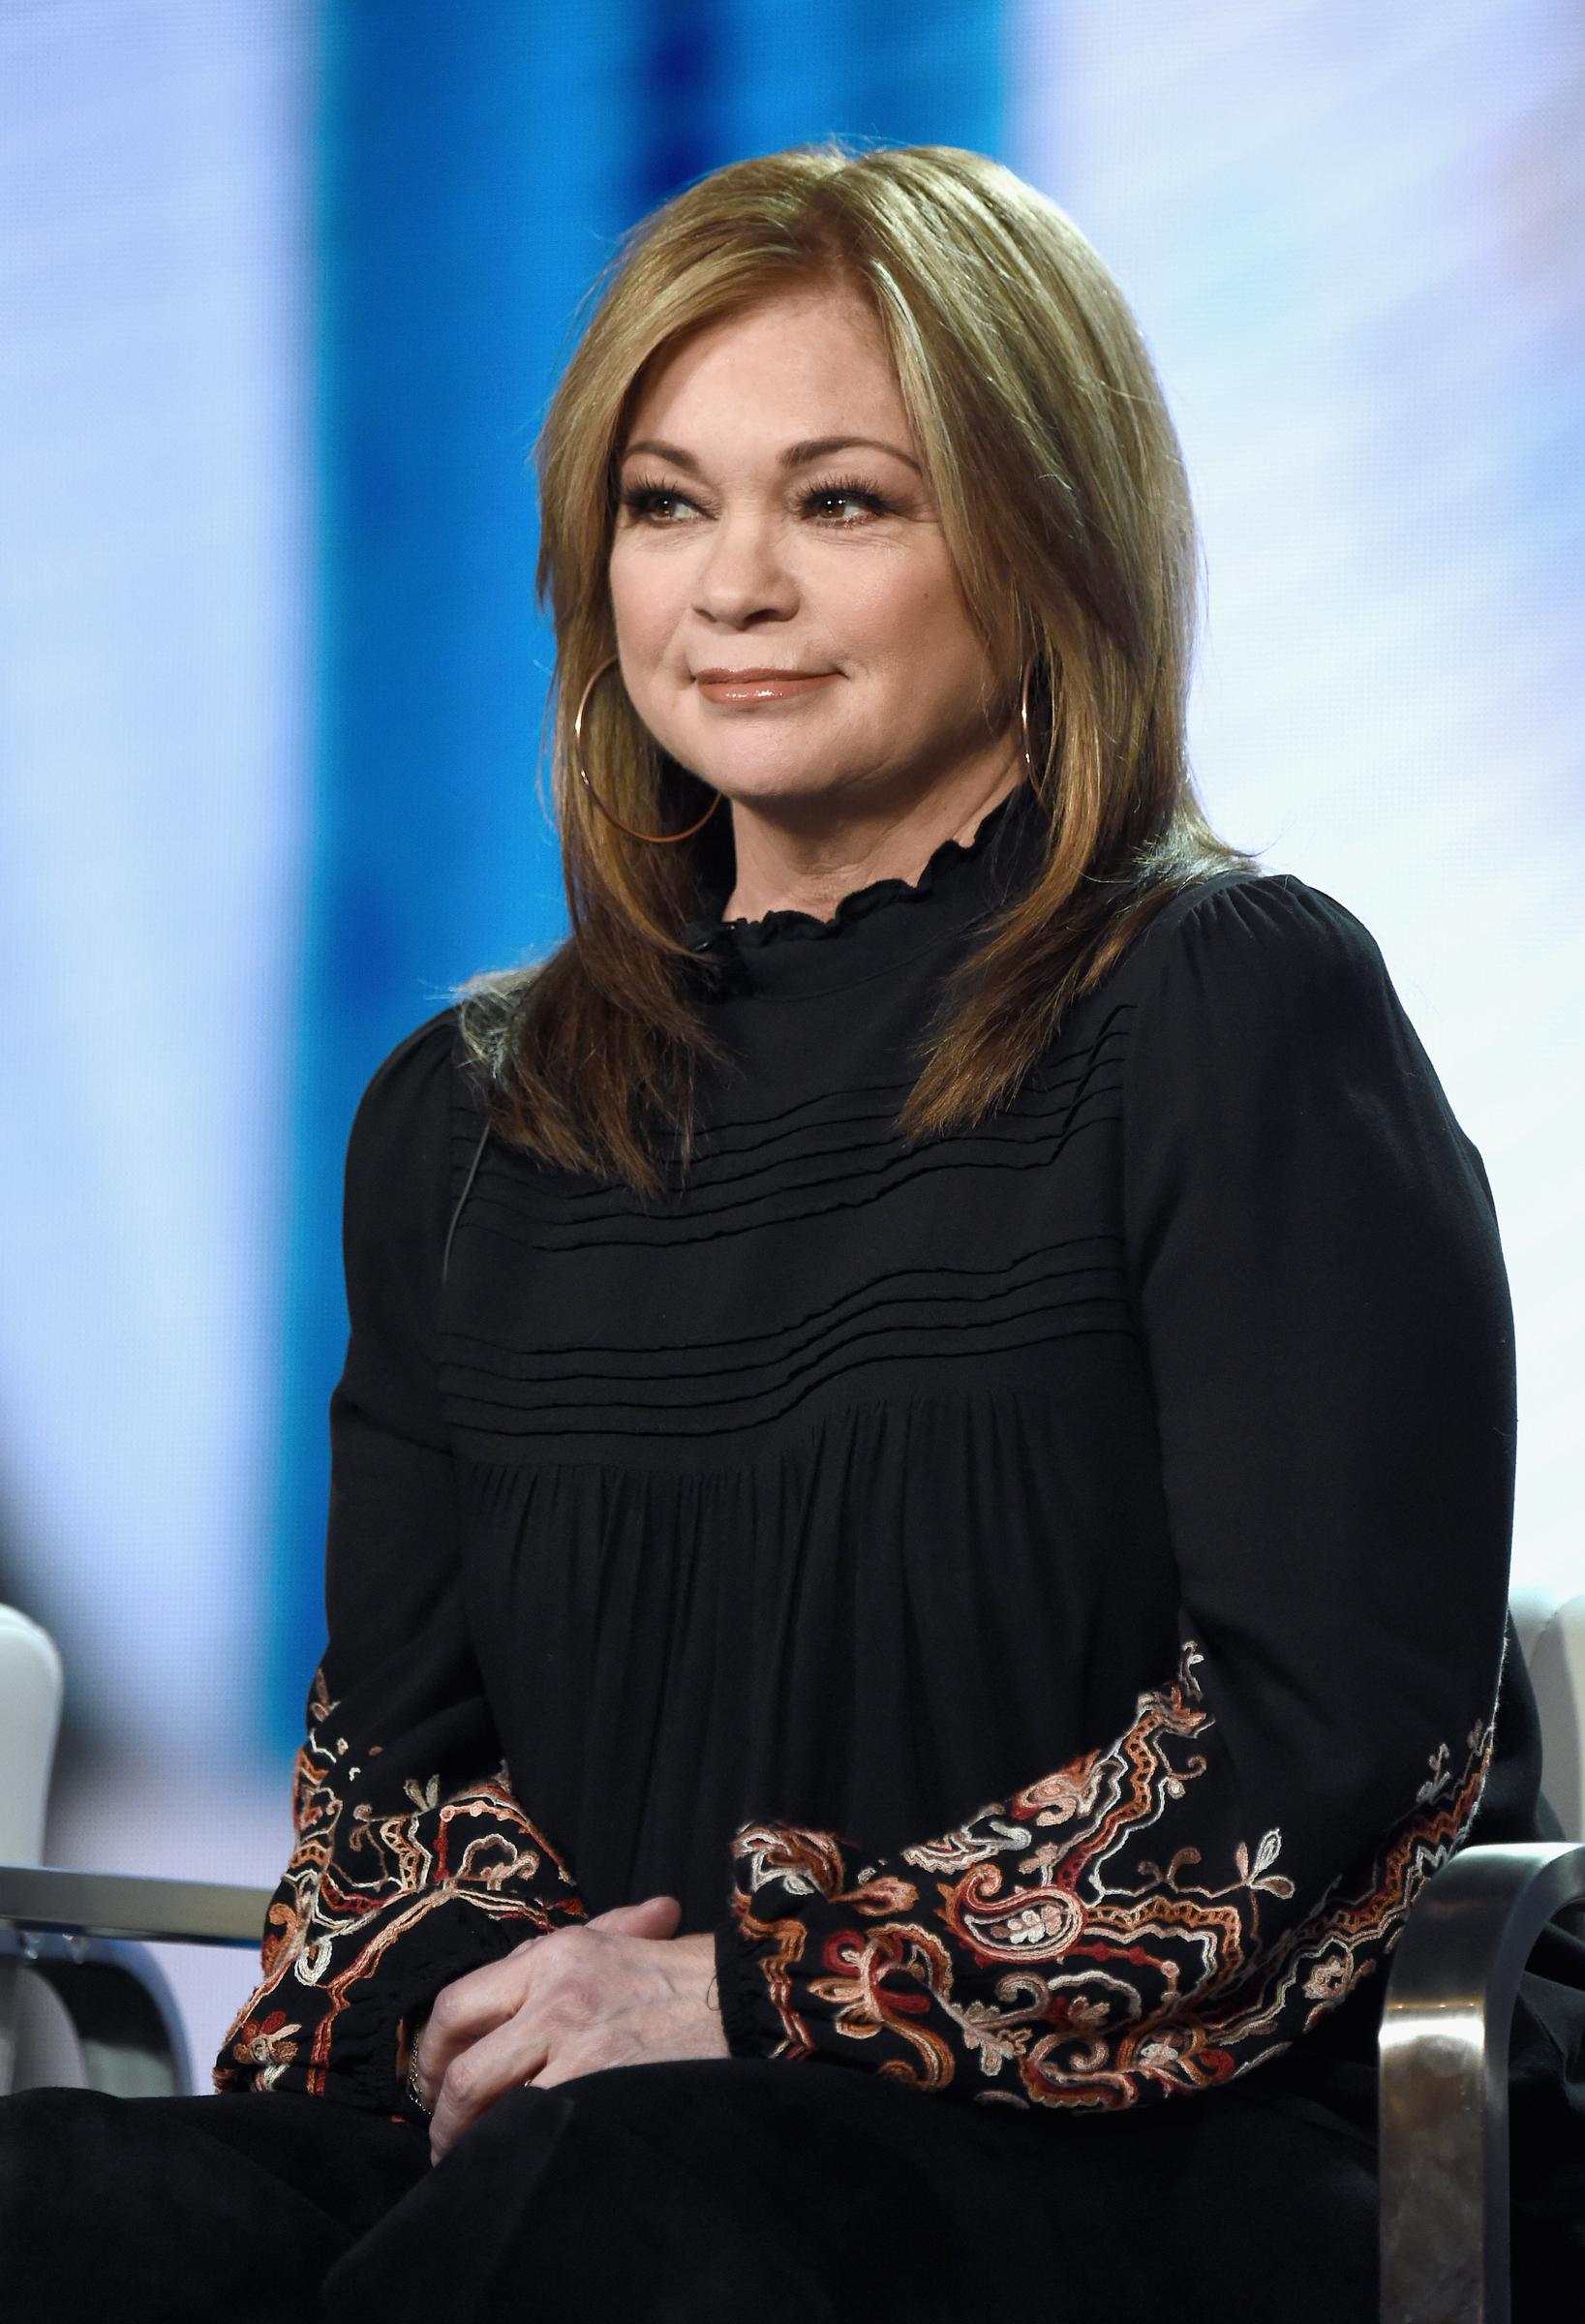 Valerie Bertinelli speaks at the Food Network event during the Discovery Communications Winter 2019 TCA Tour in Pasadena, California on February 12, 2019. | Source: Getty Images